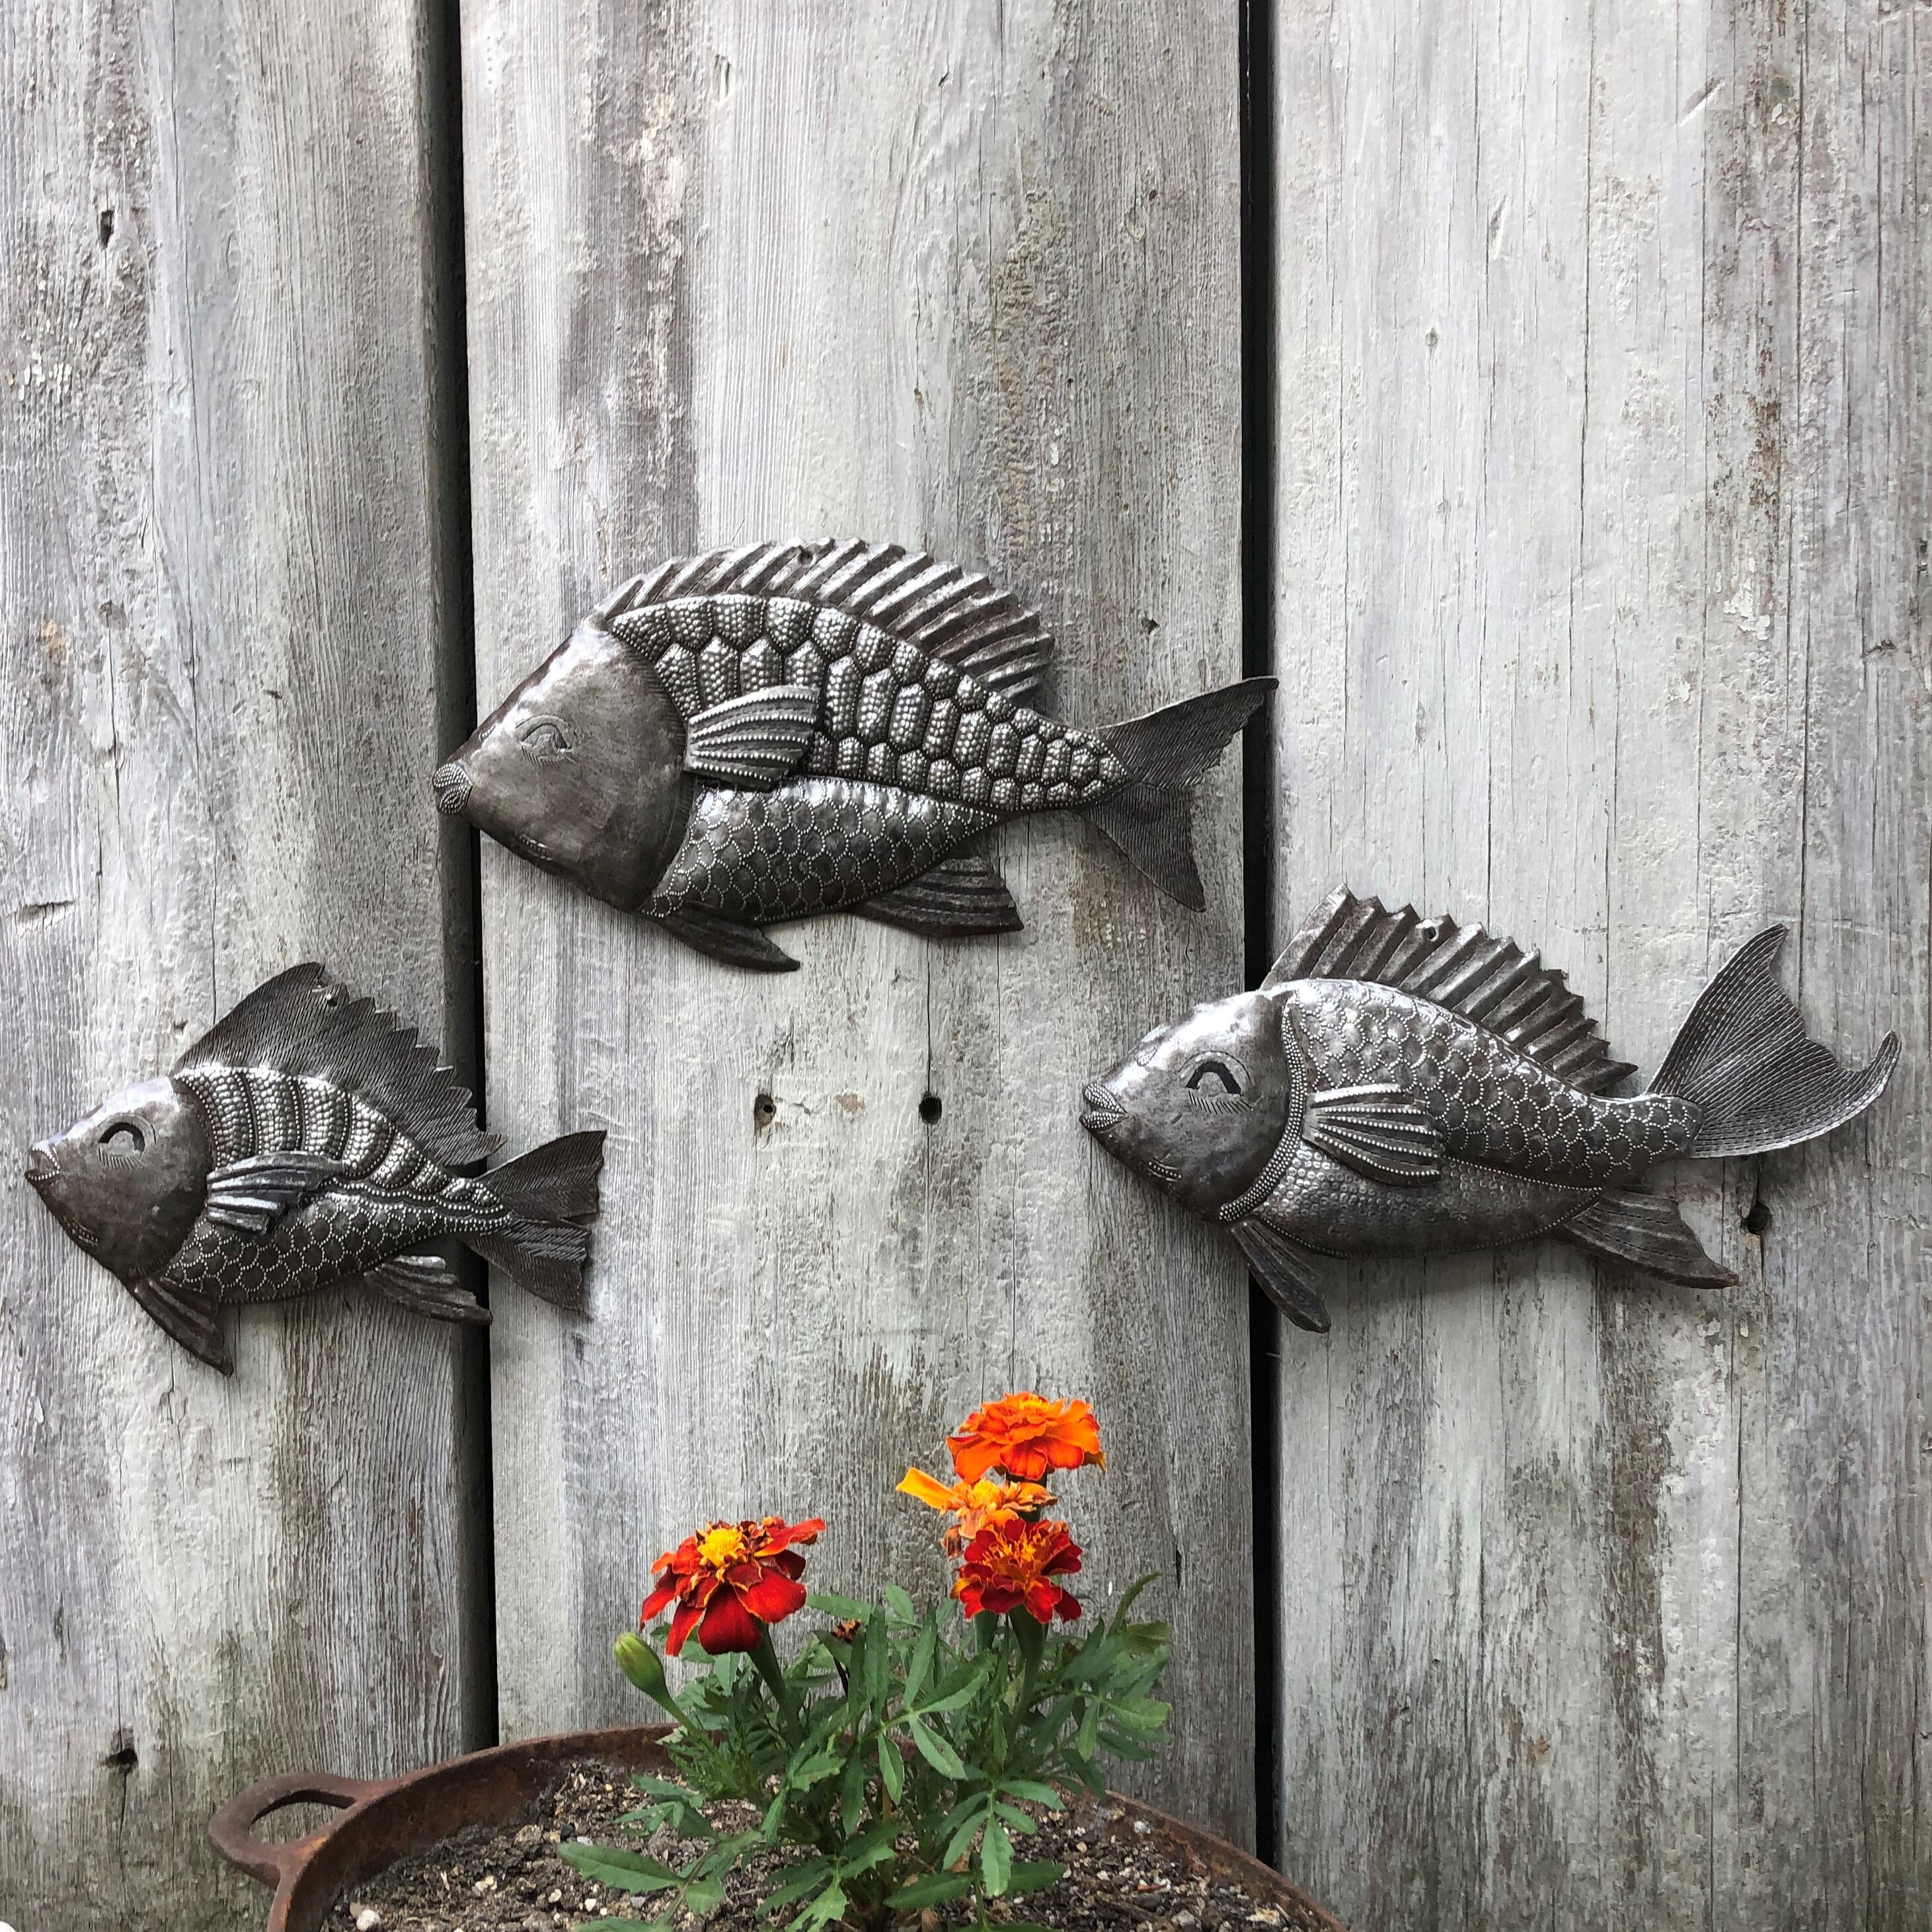 Decorative Nautical Fish, Wall Hanging, Beach Themed Home Decor, Whimsical,  Catch of the Day 8.5 X 6 X 0.5 Inches 